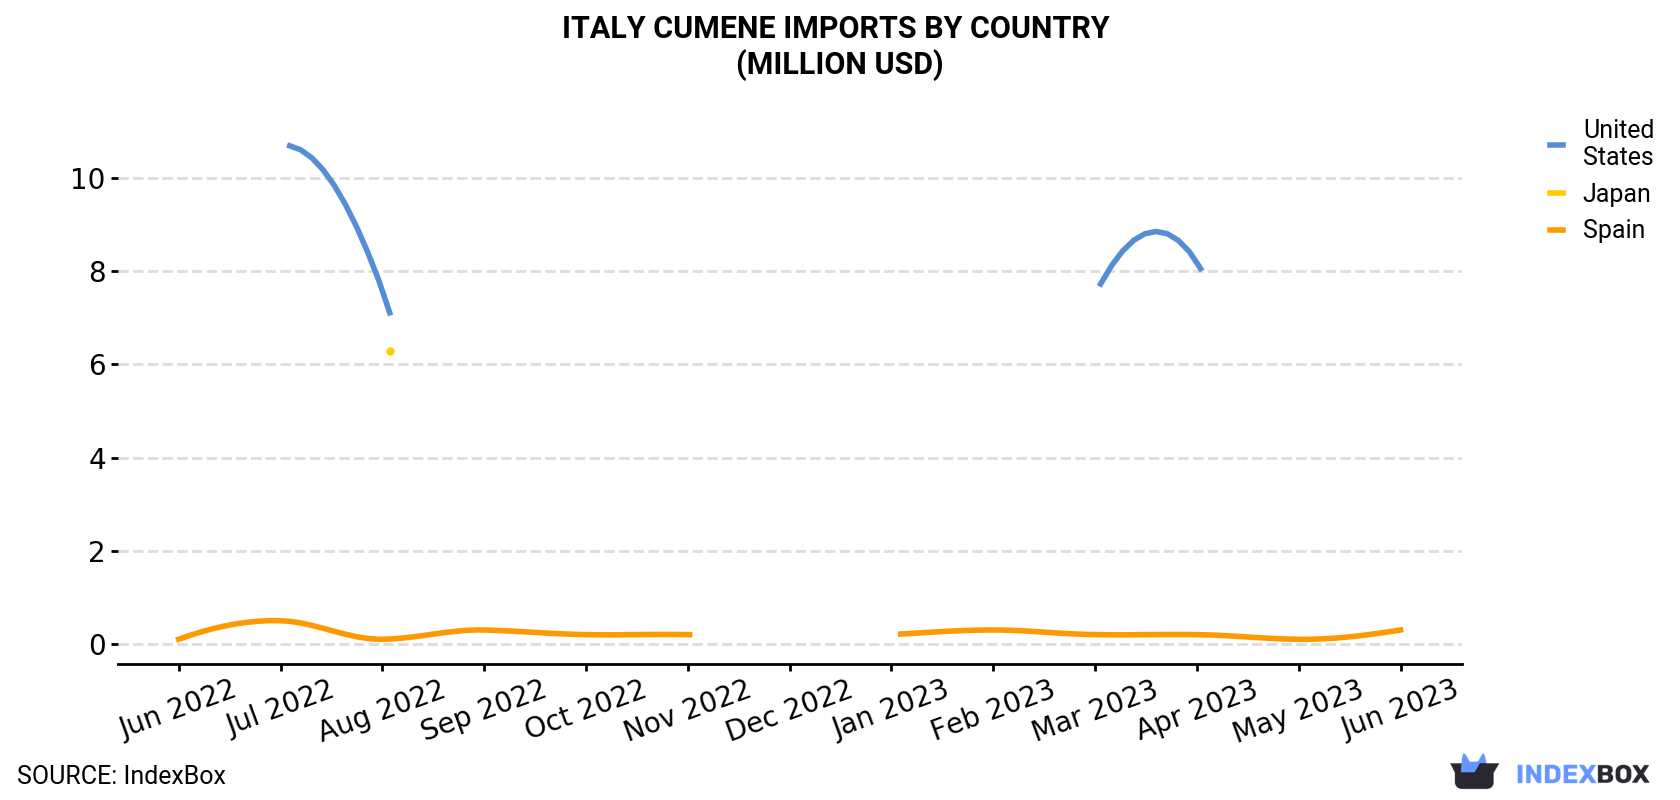 Italy Cumene Imports By Country (Million USD)